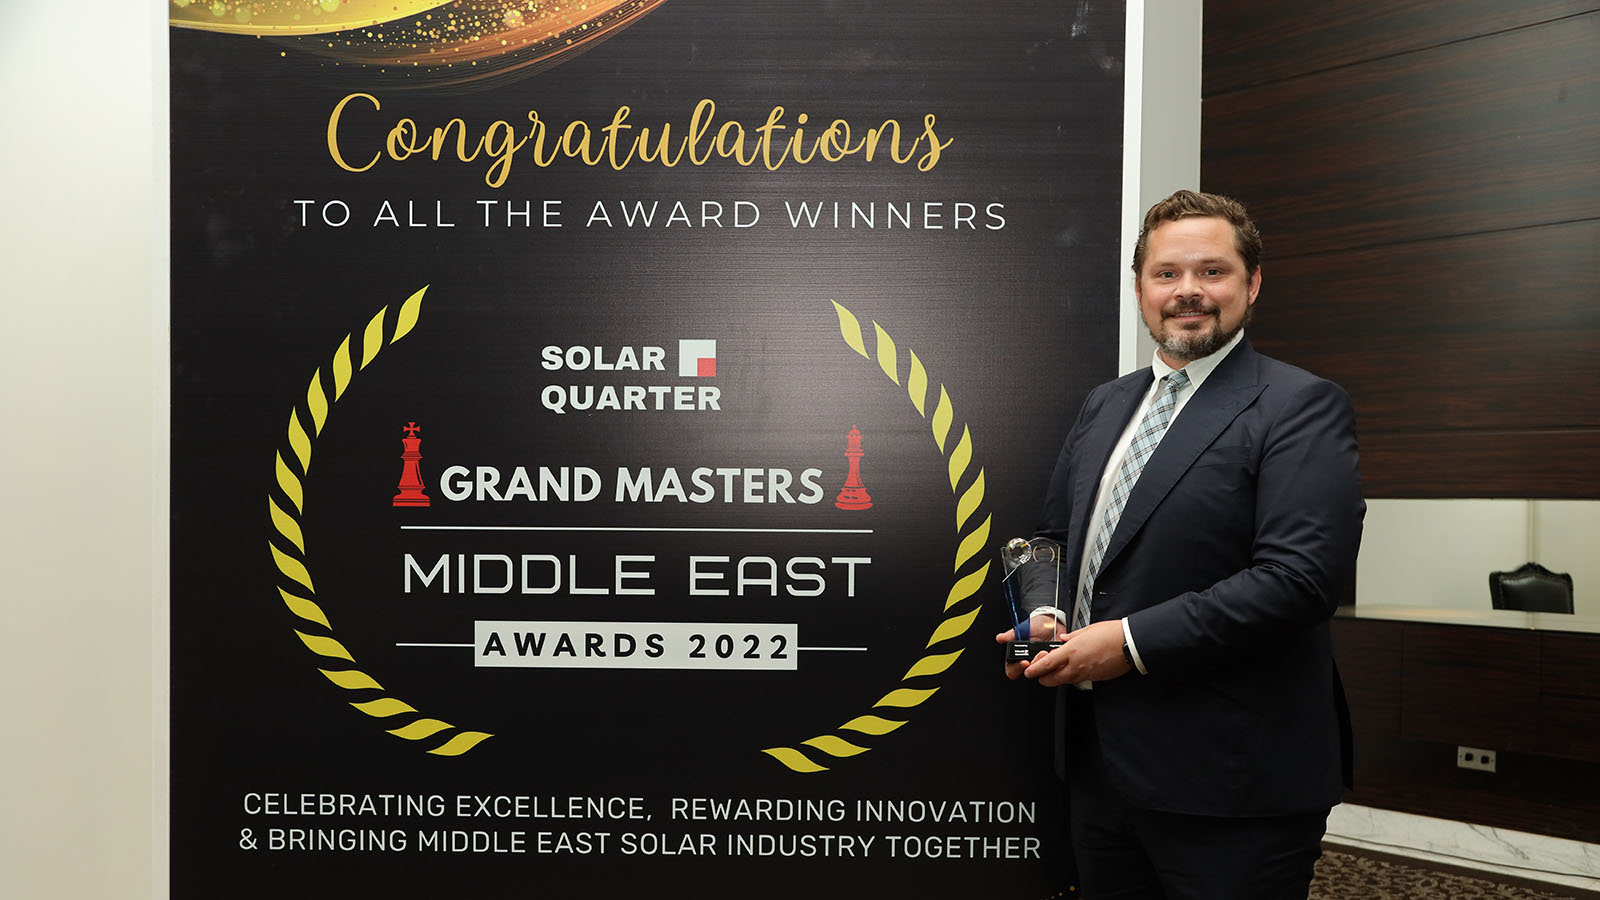 Johnny Kollin Bags Award for Corporate Advisory in the Middle East Solar Energy Industry